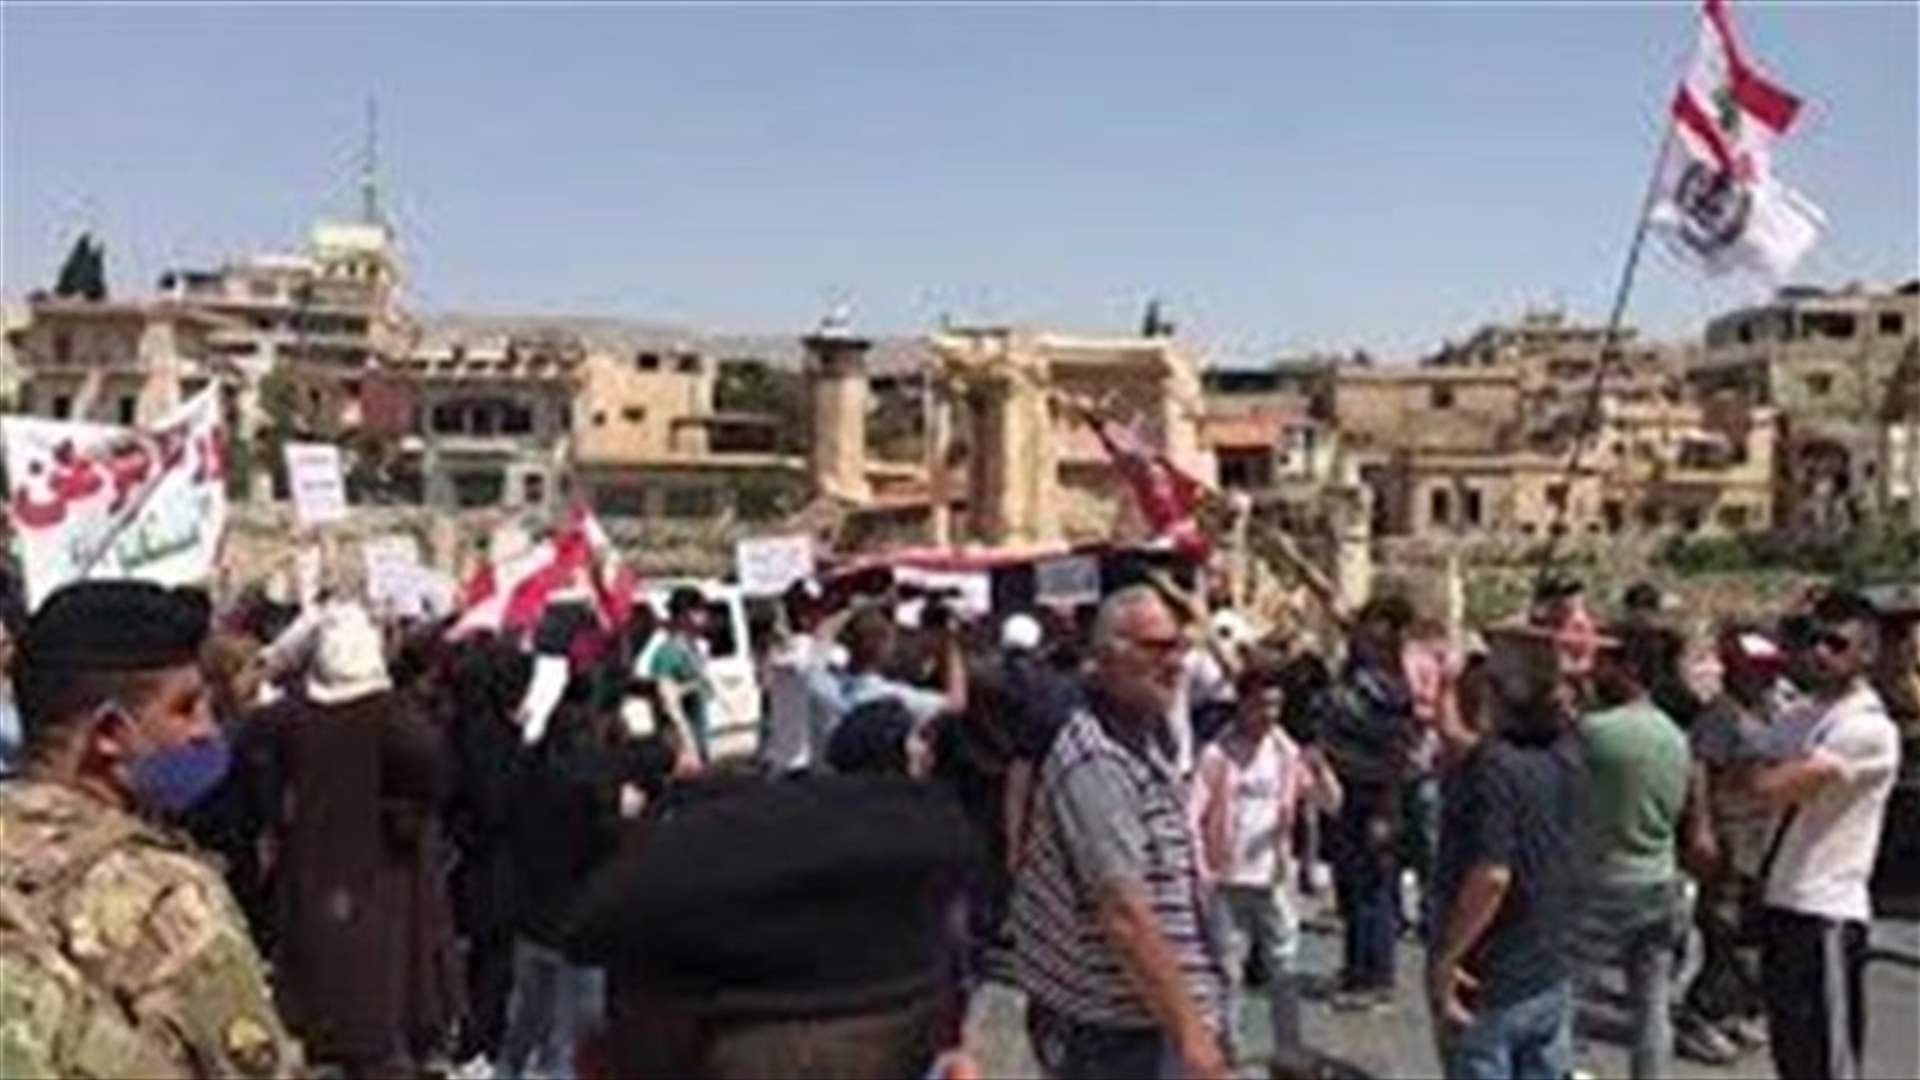 Protesters stage sit-in in Baalbek, put their degrees in a coffin-[VIDEO]